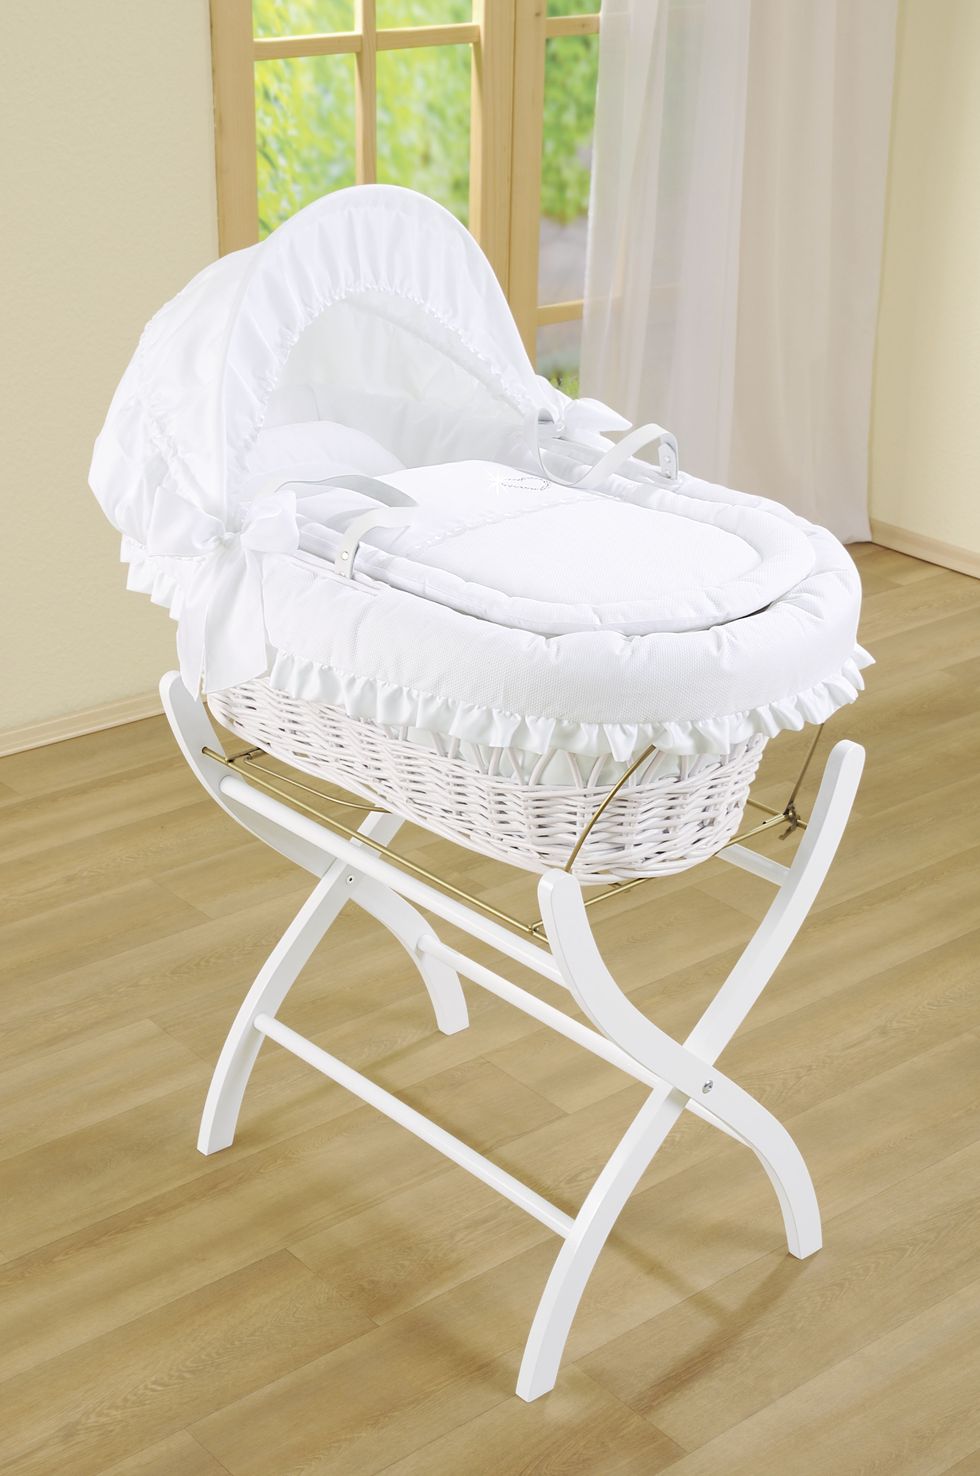 Furniture, Product, Infant bed, White, Chair, Baby Products, Bed, Cradle, Wicker, Comfort, 